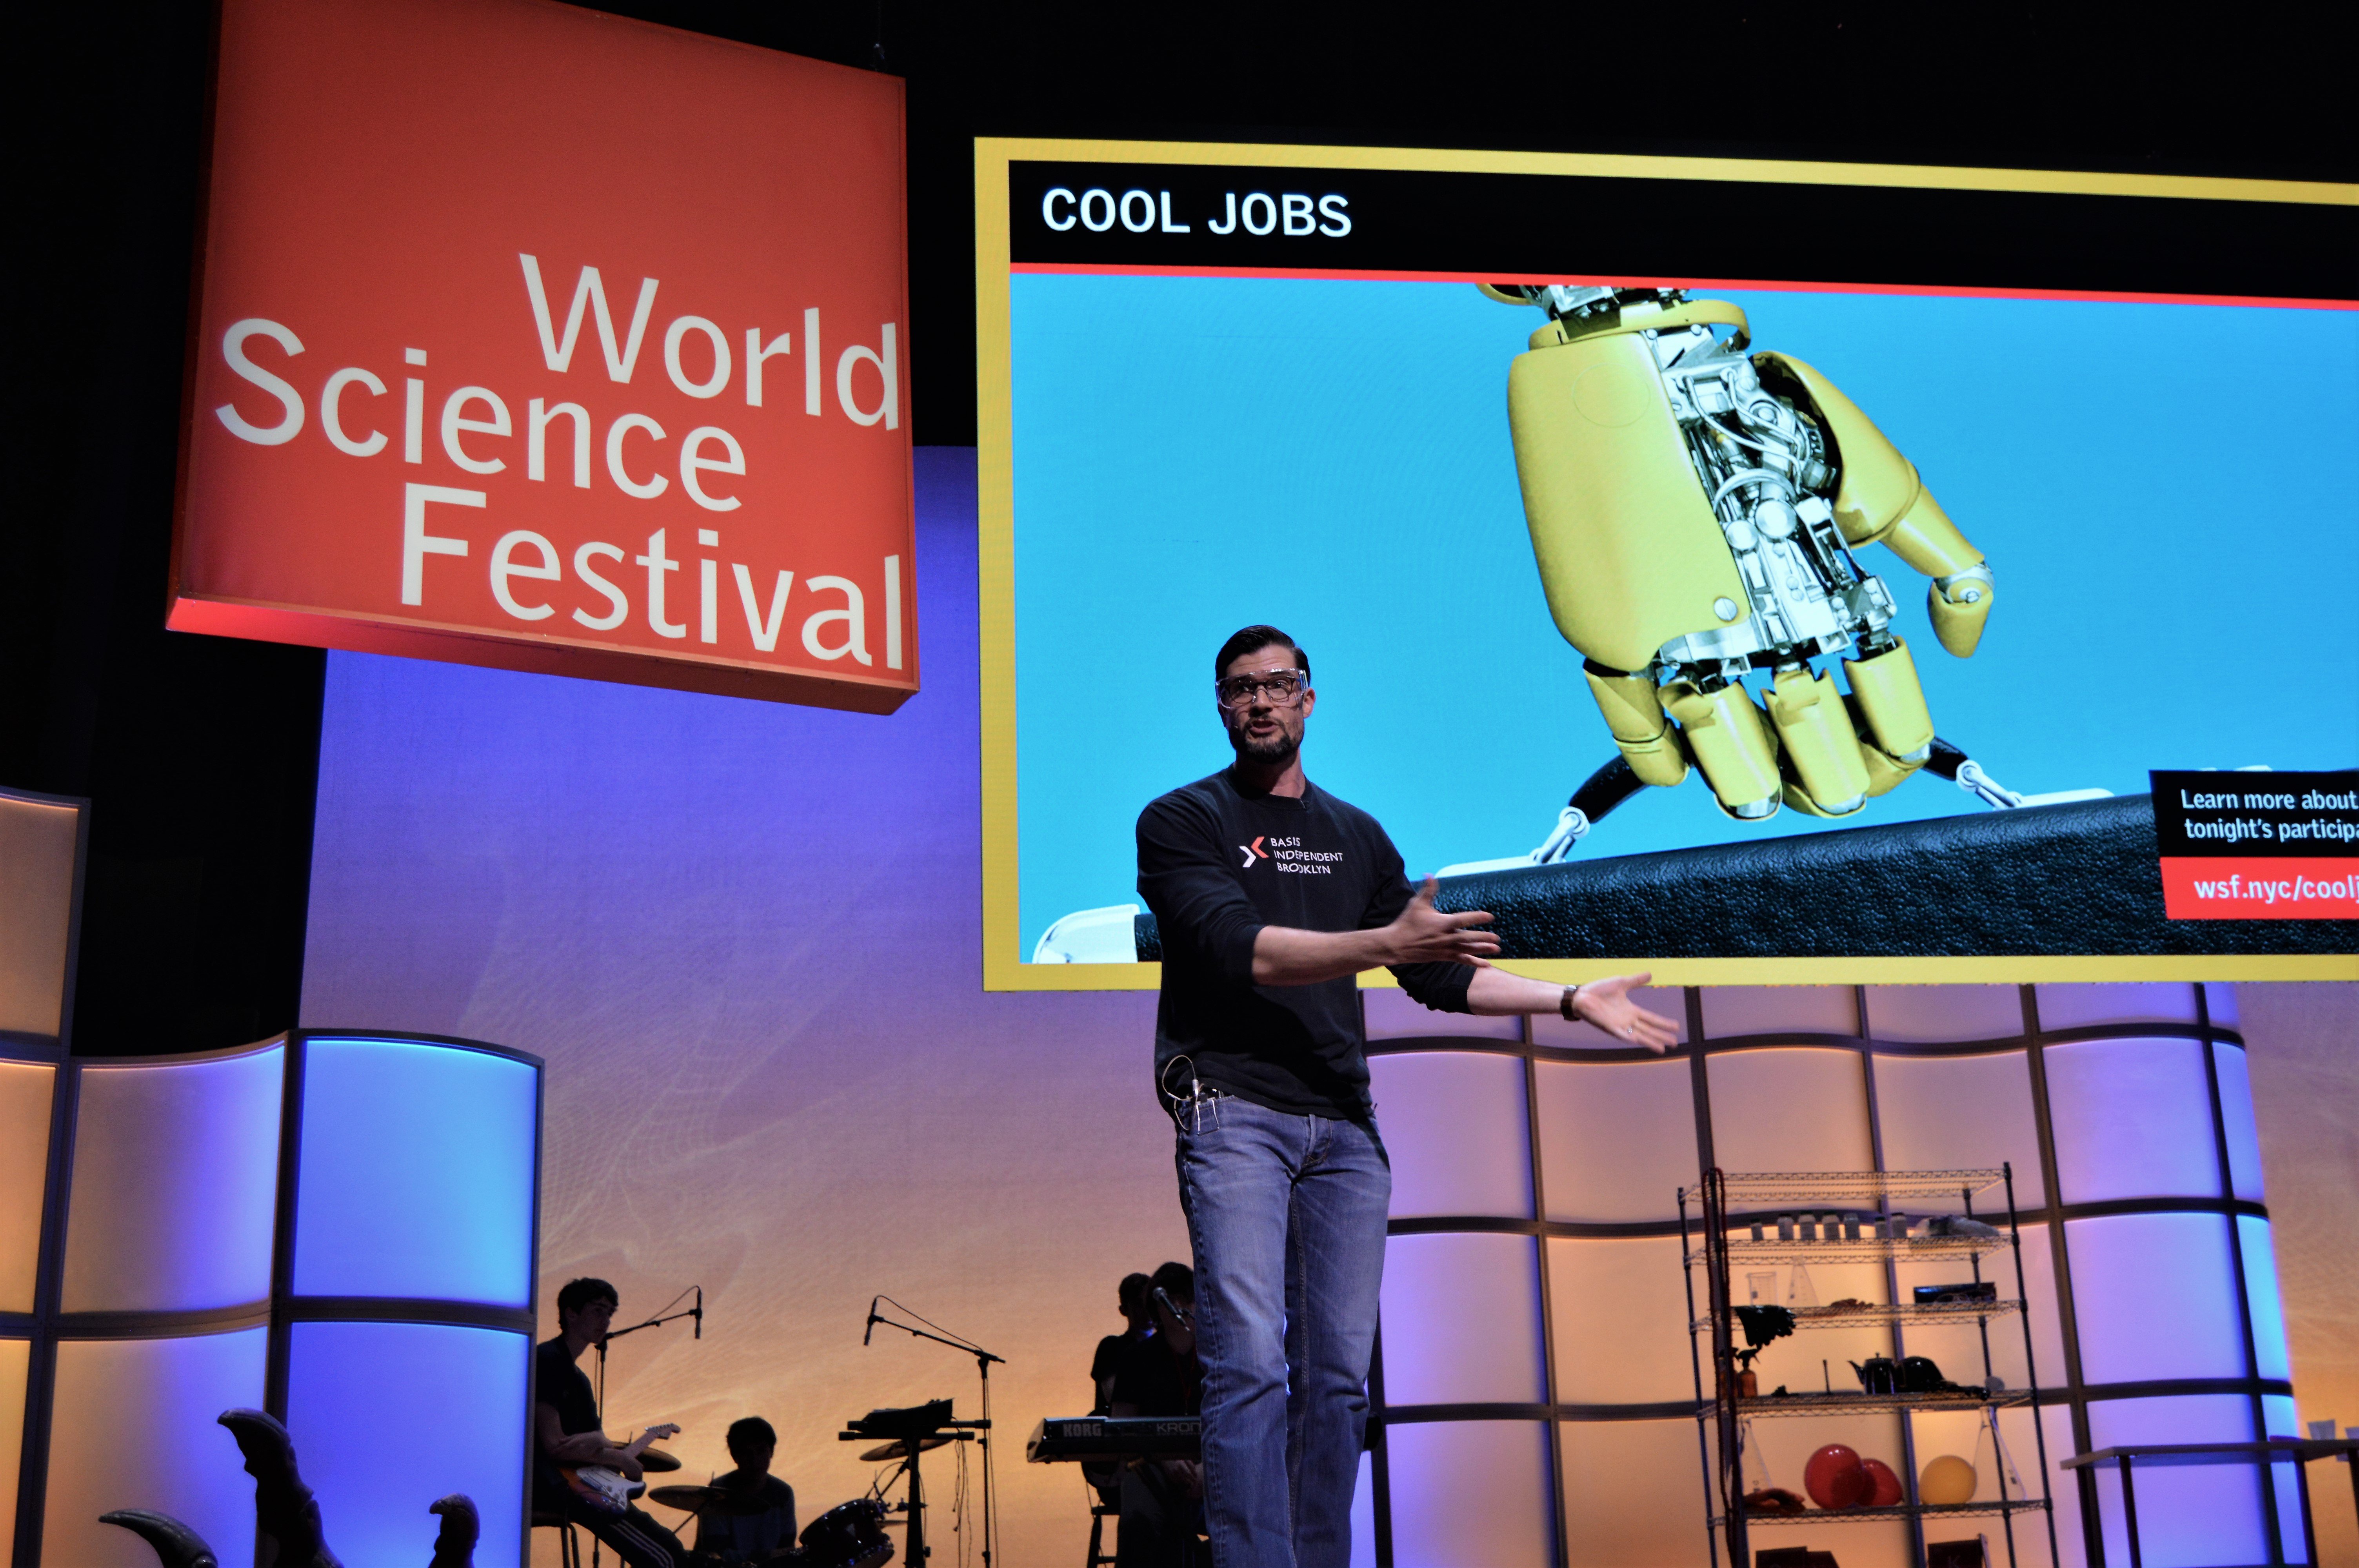 World Science Festival Features Mr. Winter as Science Super Star